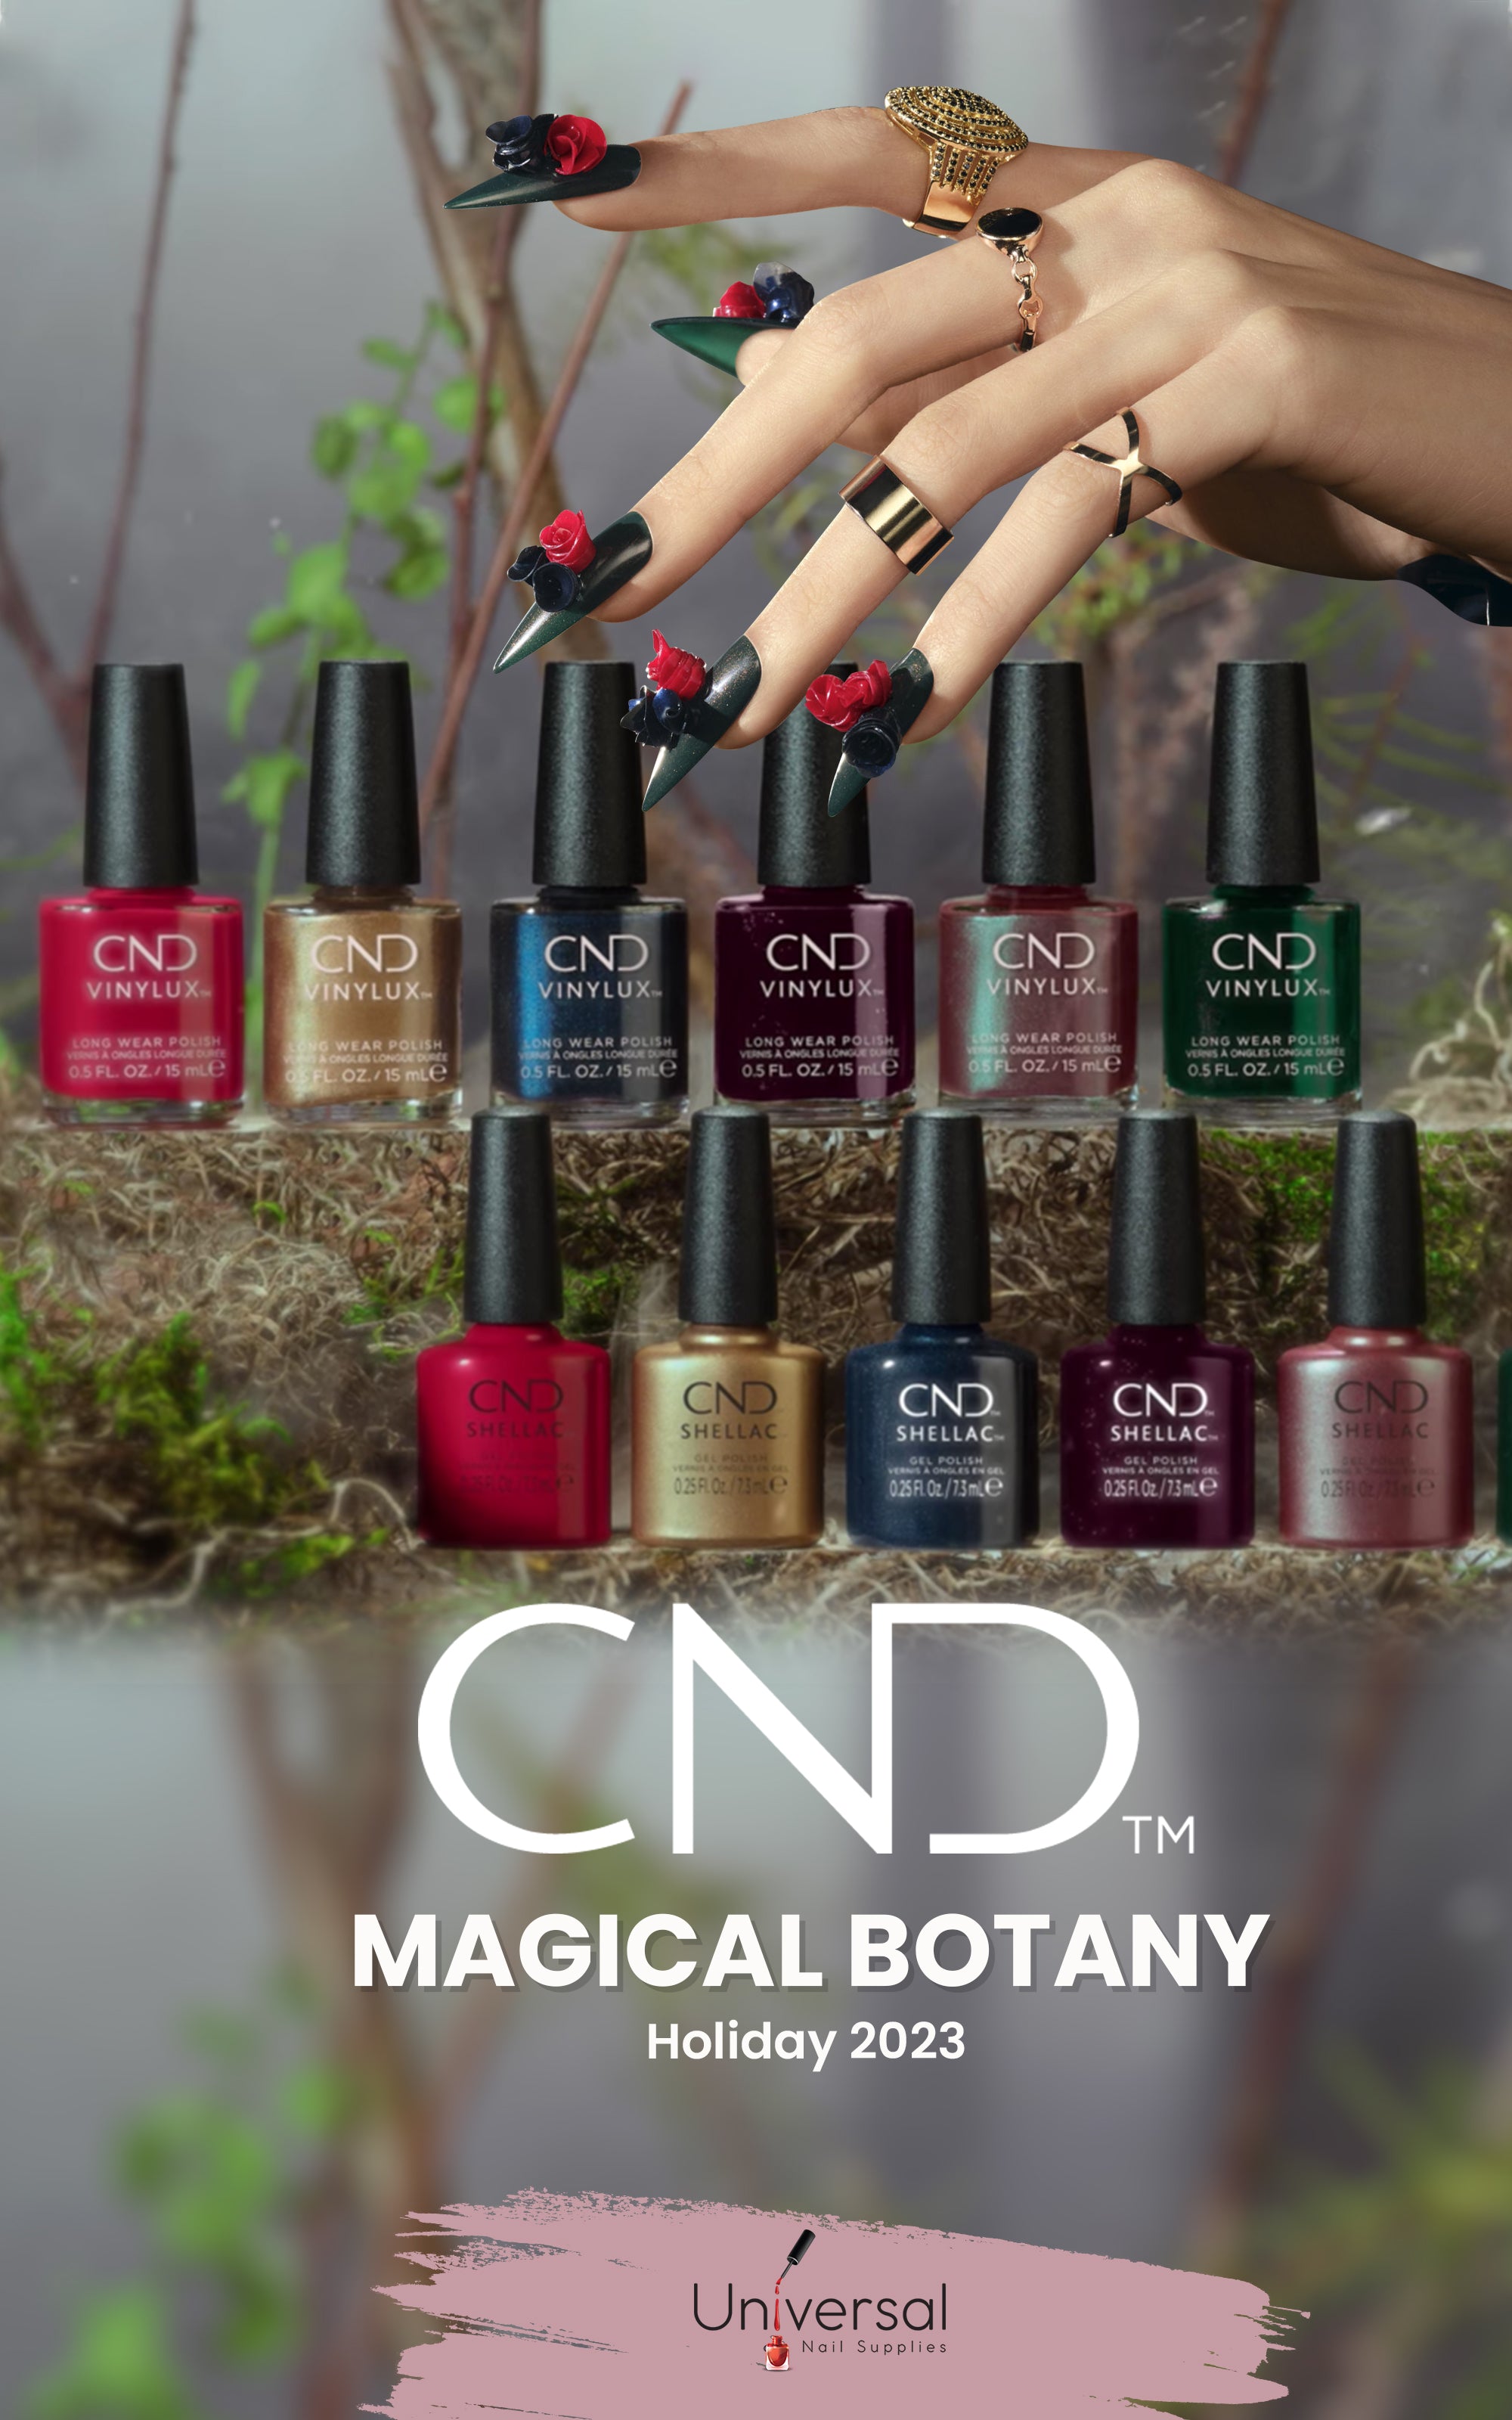 Buy Wholesale guangzhou nail supply Nail Polish And Find Great Discounts 